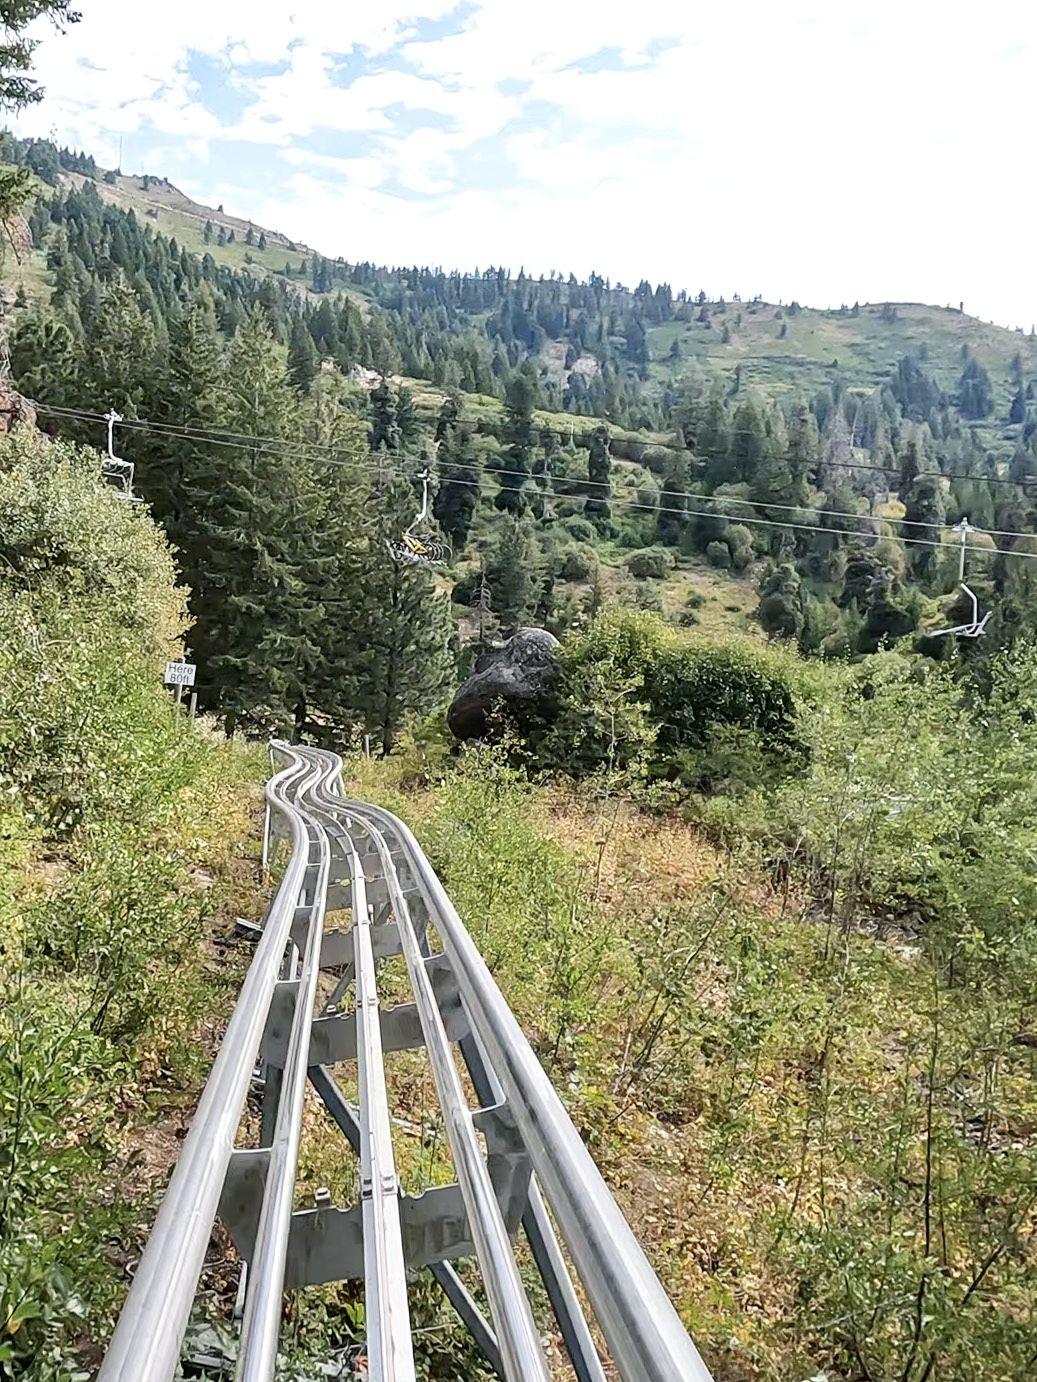 Looking at a silver coaster track while riding the Bogus Basin alpine coaster.